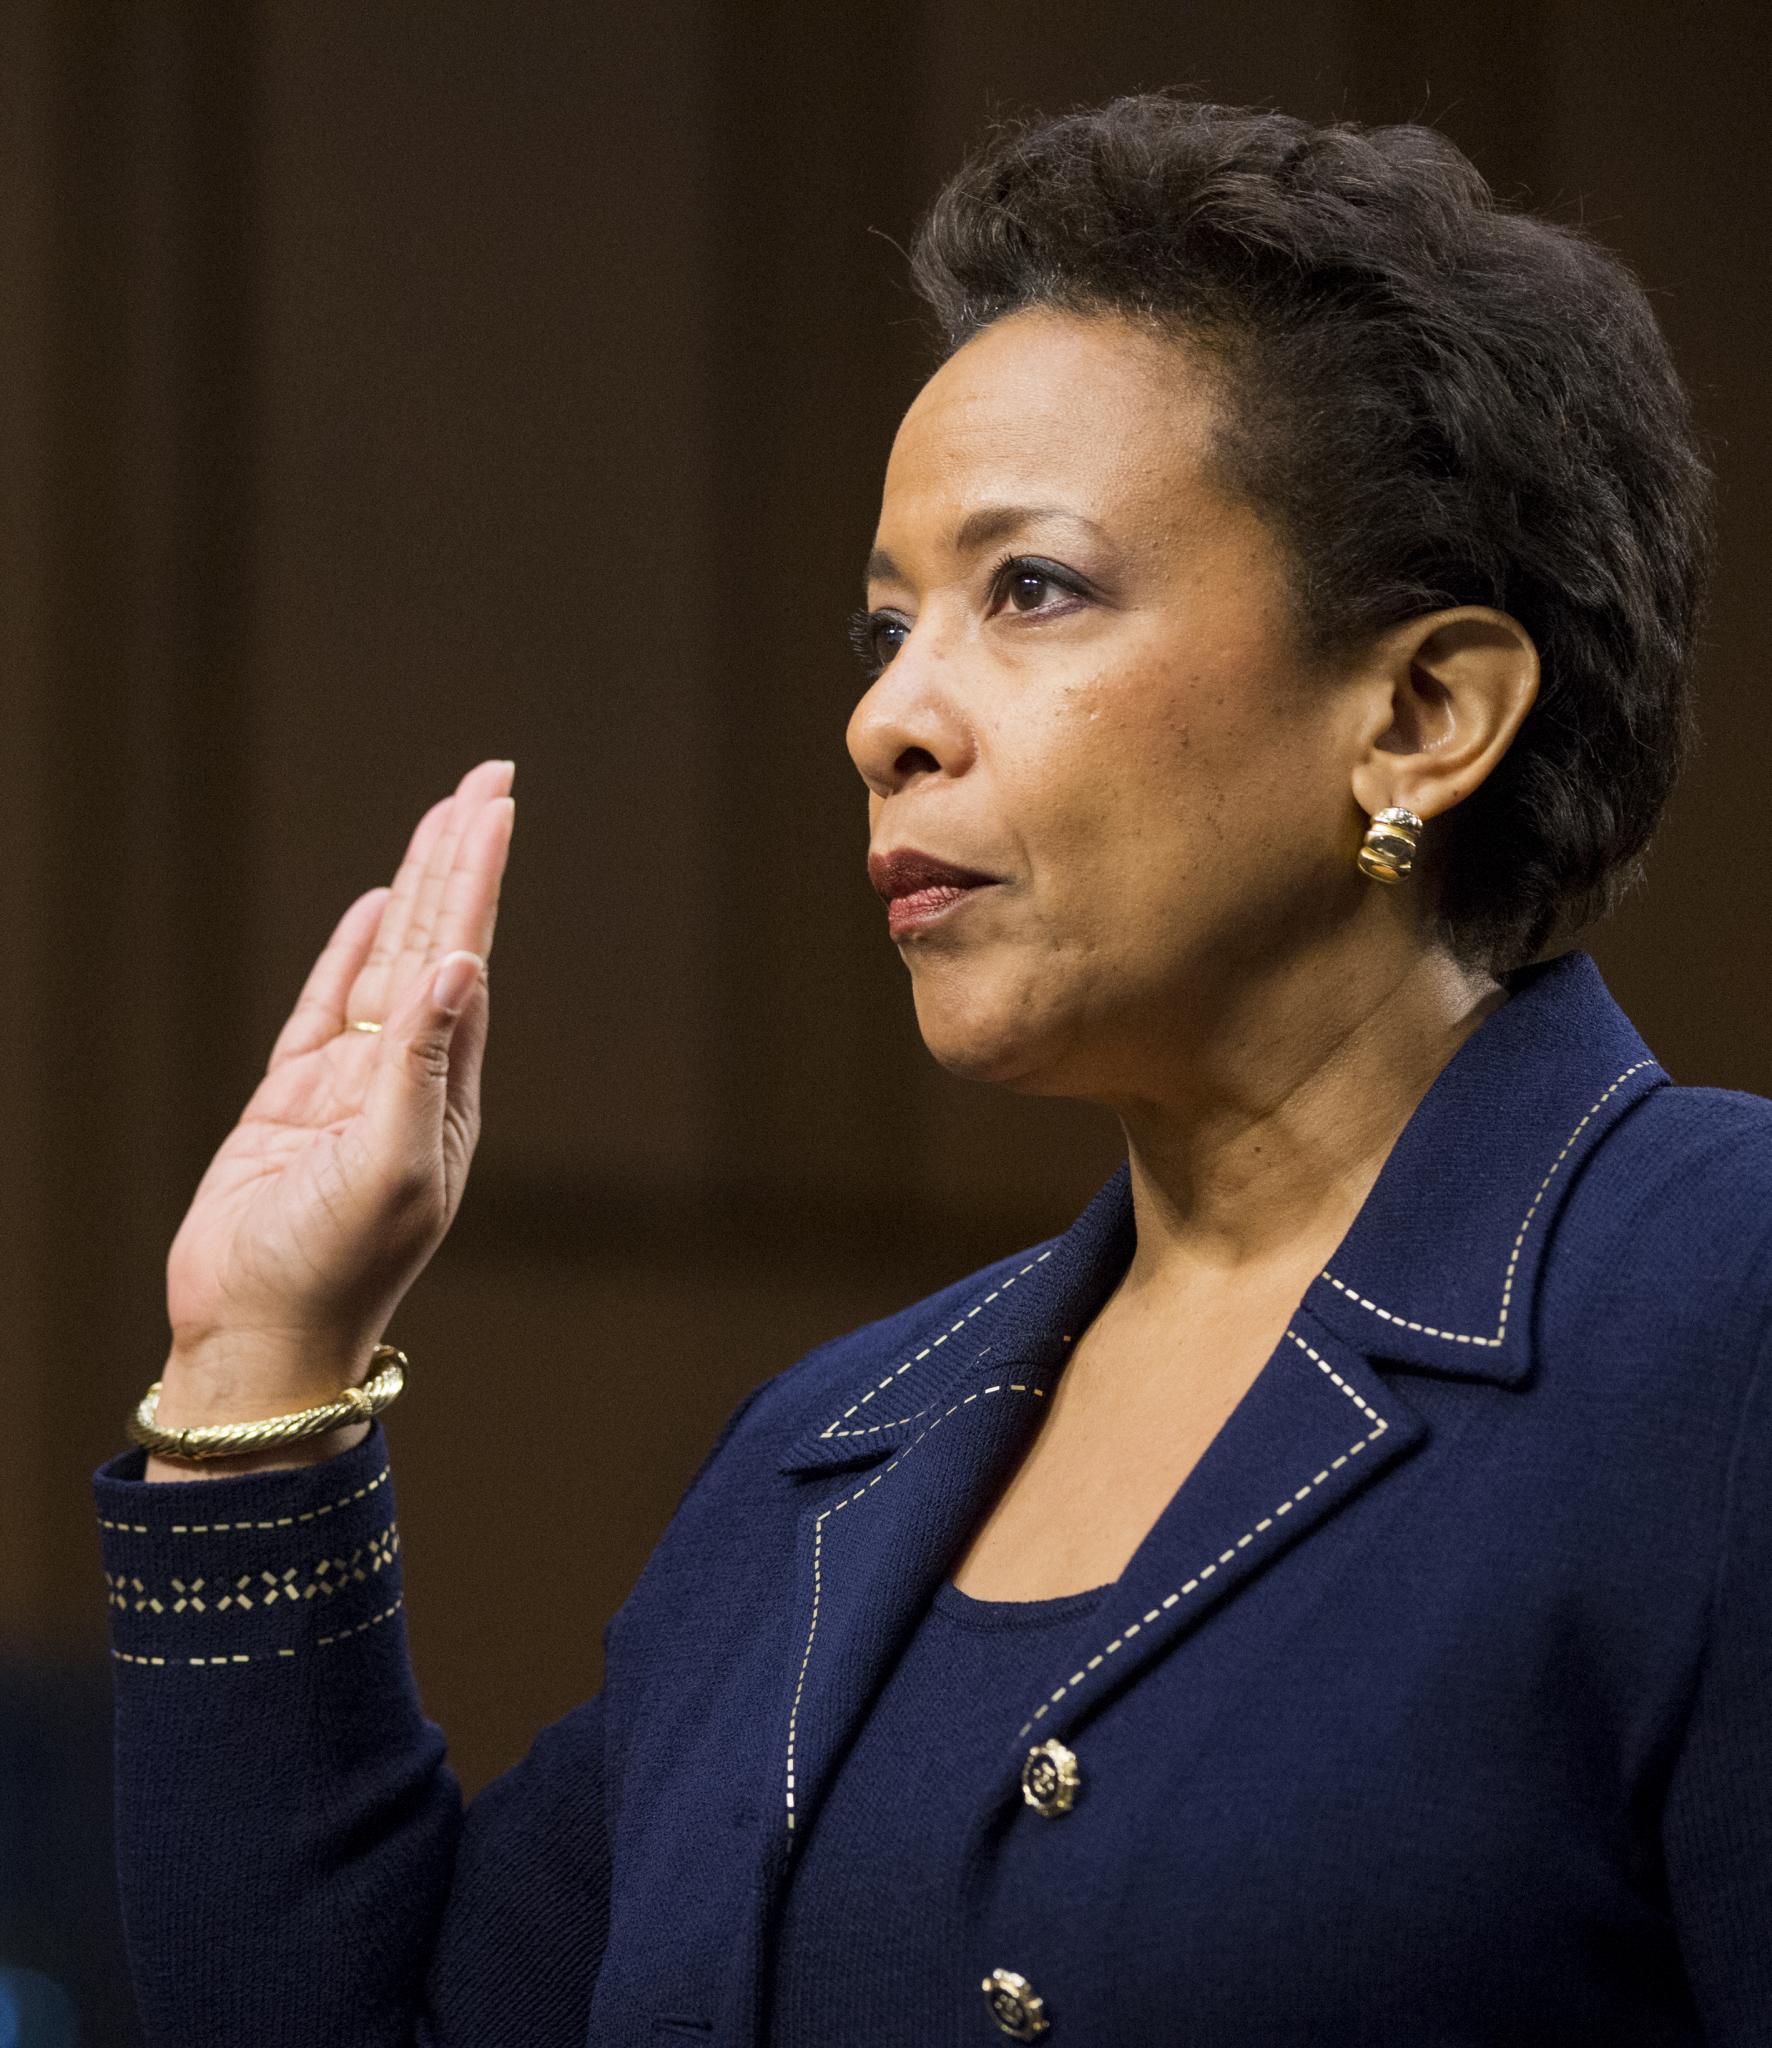 Senator Equates Loretta Lynch's Prolonged Confirmation With Making Her Sit in the 'Back of the Bus'